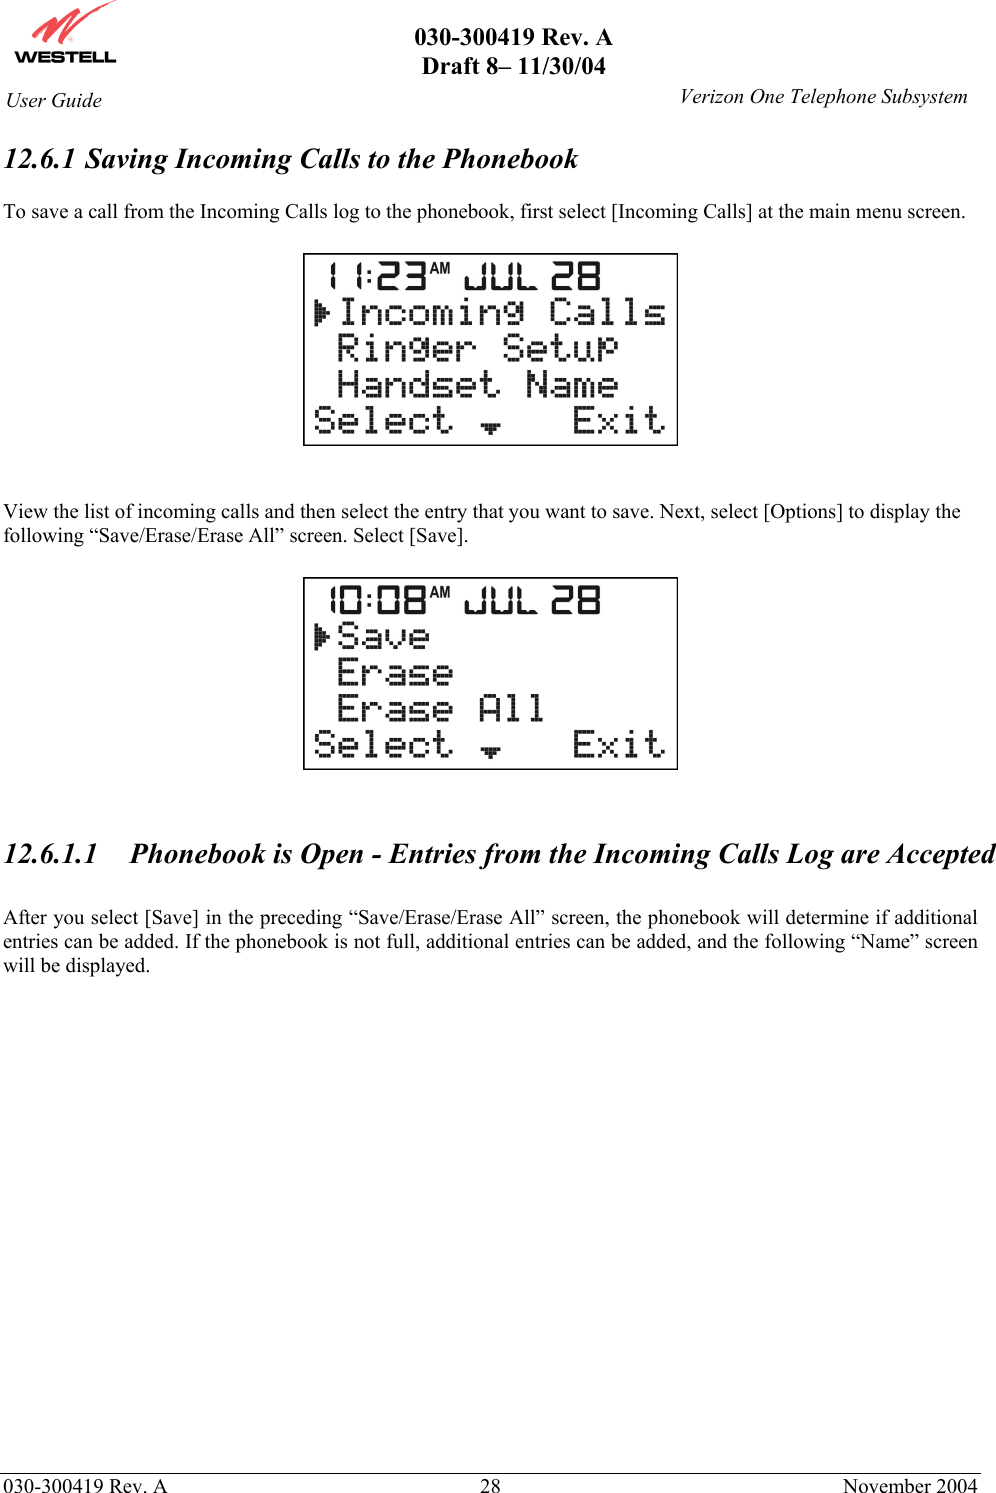       030-300419 Rev. A Draft 8– 11/30/04    030-300419 Rev. A  28  November 2004 User Guide   Verizon One Telephone Subsystem12.6.1  Saving Incoming Calls to the Phonebook  To save a call from the Incoming Calls log to the phonebook, first select [Incoming Calls] at the main menu screen.      View the list of incoming calls and then select the entry that you want to save. Next, select [Options] to display the following “Save/Erase/Erase All” screen. Select [Save].     12.6.1.1  Phonebook is Open - Entries from the Incoming Calls Log are Accepted  After you select [Save] in the preceding “Save/Erase/Erase All” screen, the phonebook will determine if additional entries can be added. If the phonebook is not full, additional entries can be added, and the following “Name” screen will be displayed.                      